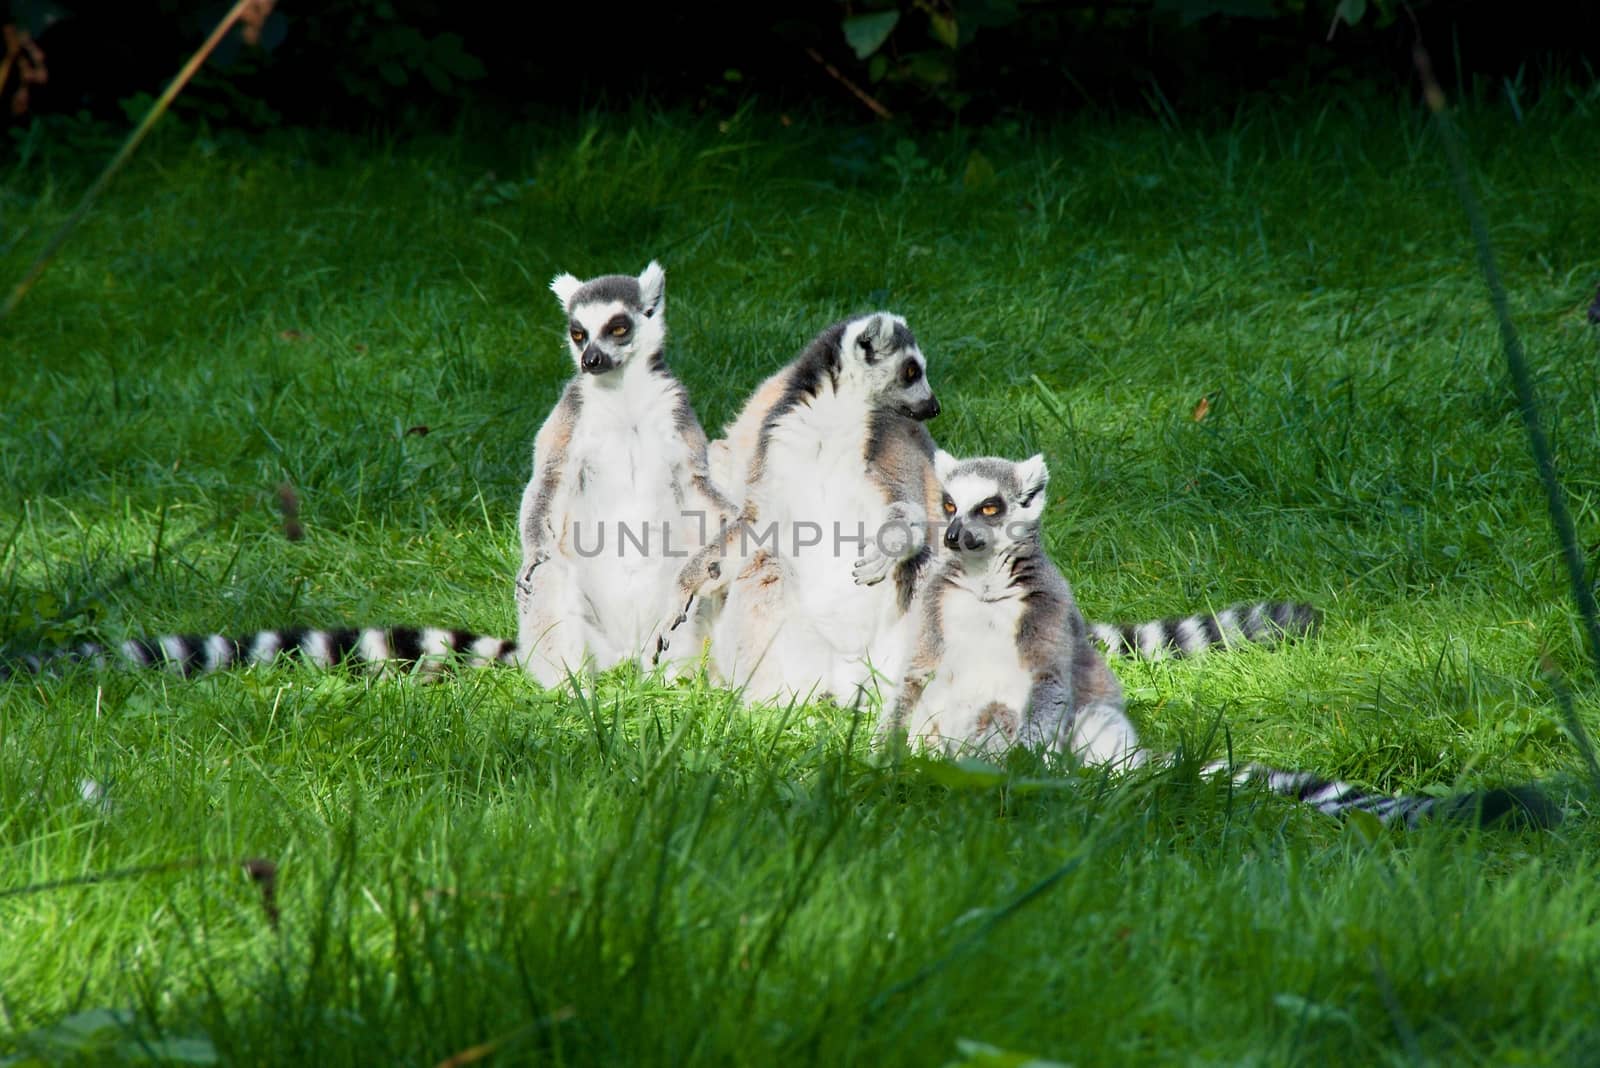 Photo shows a closeup of a lemur family on the grass.